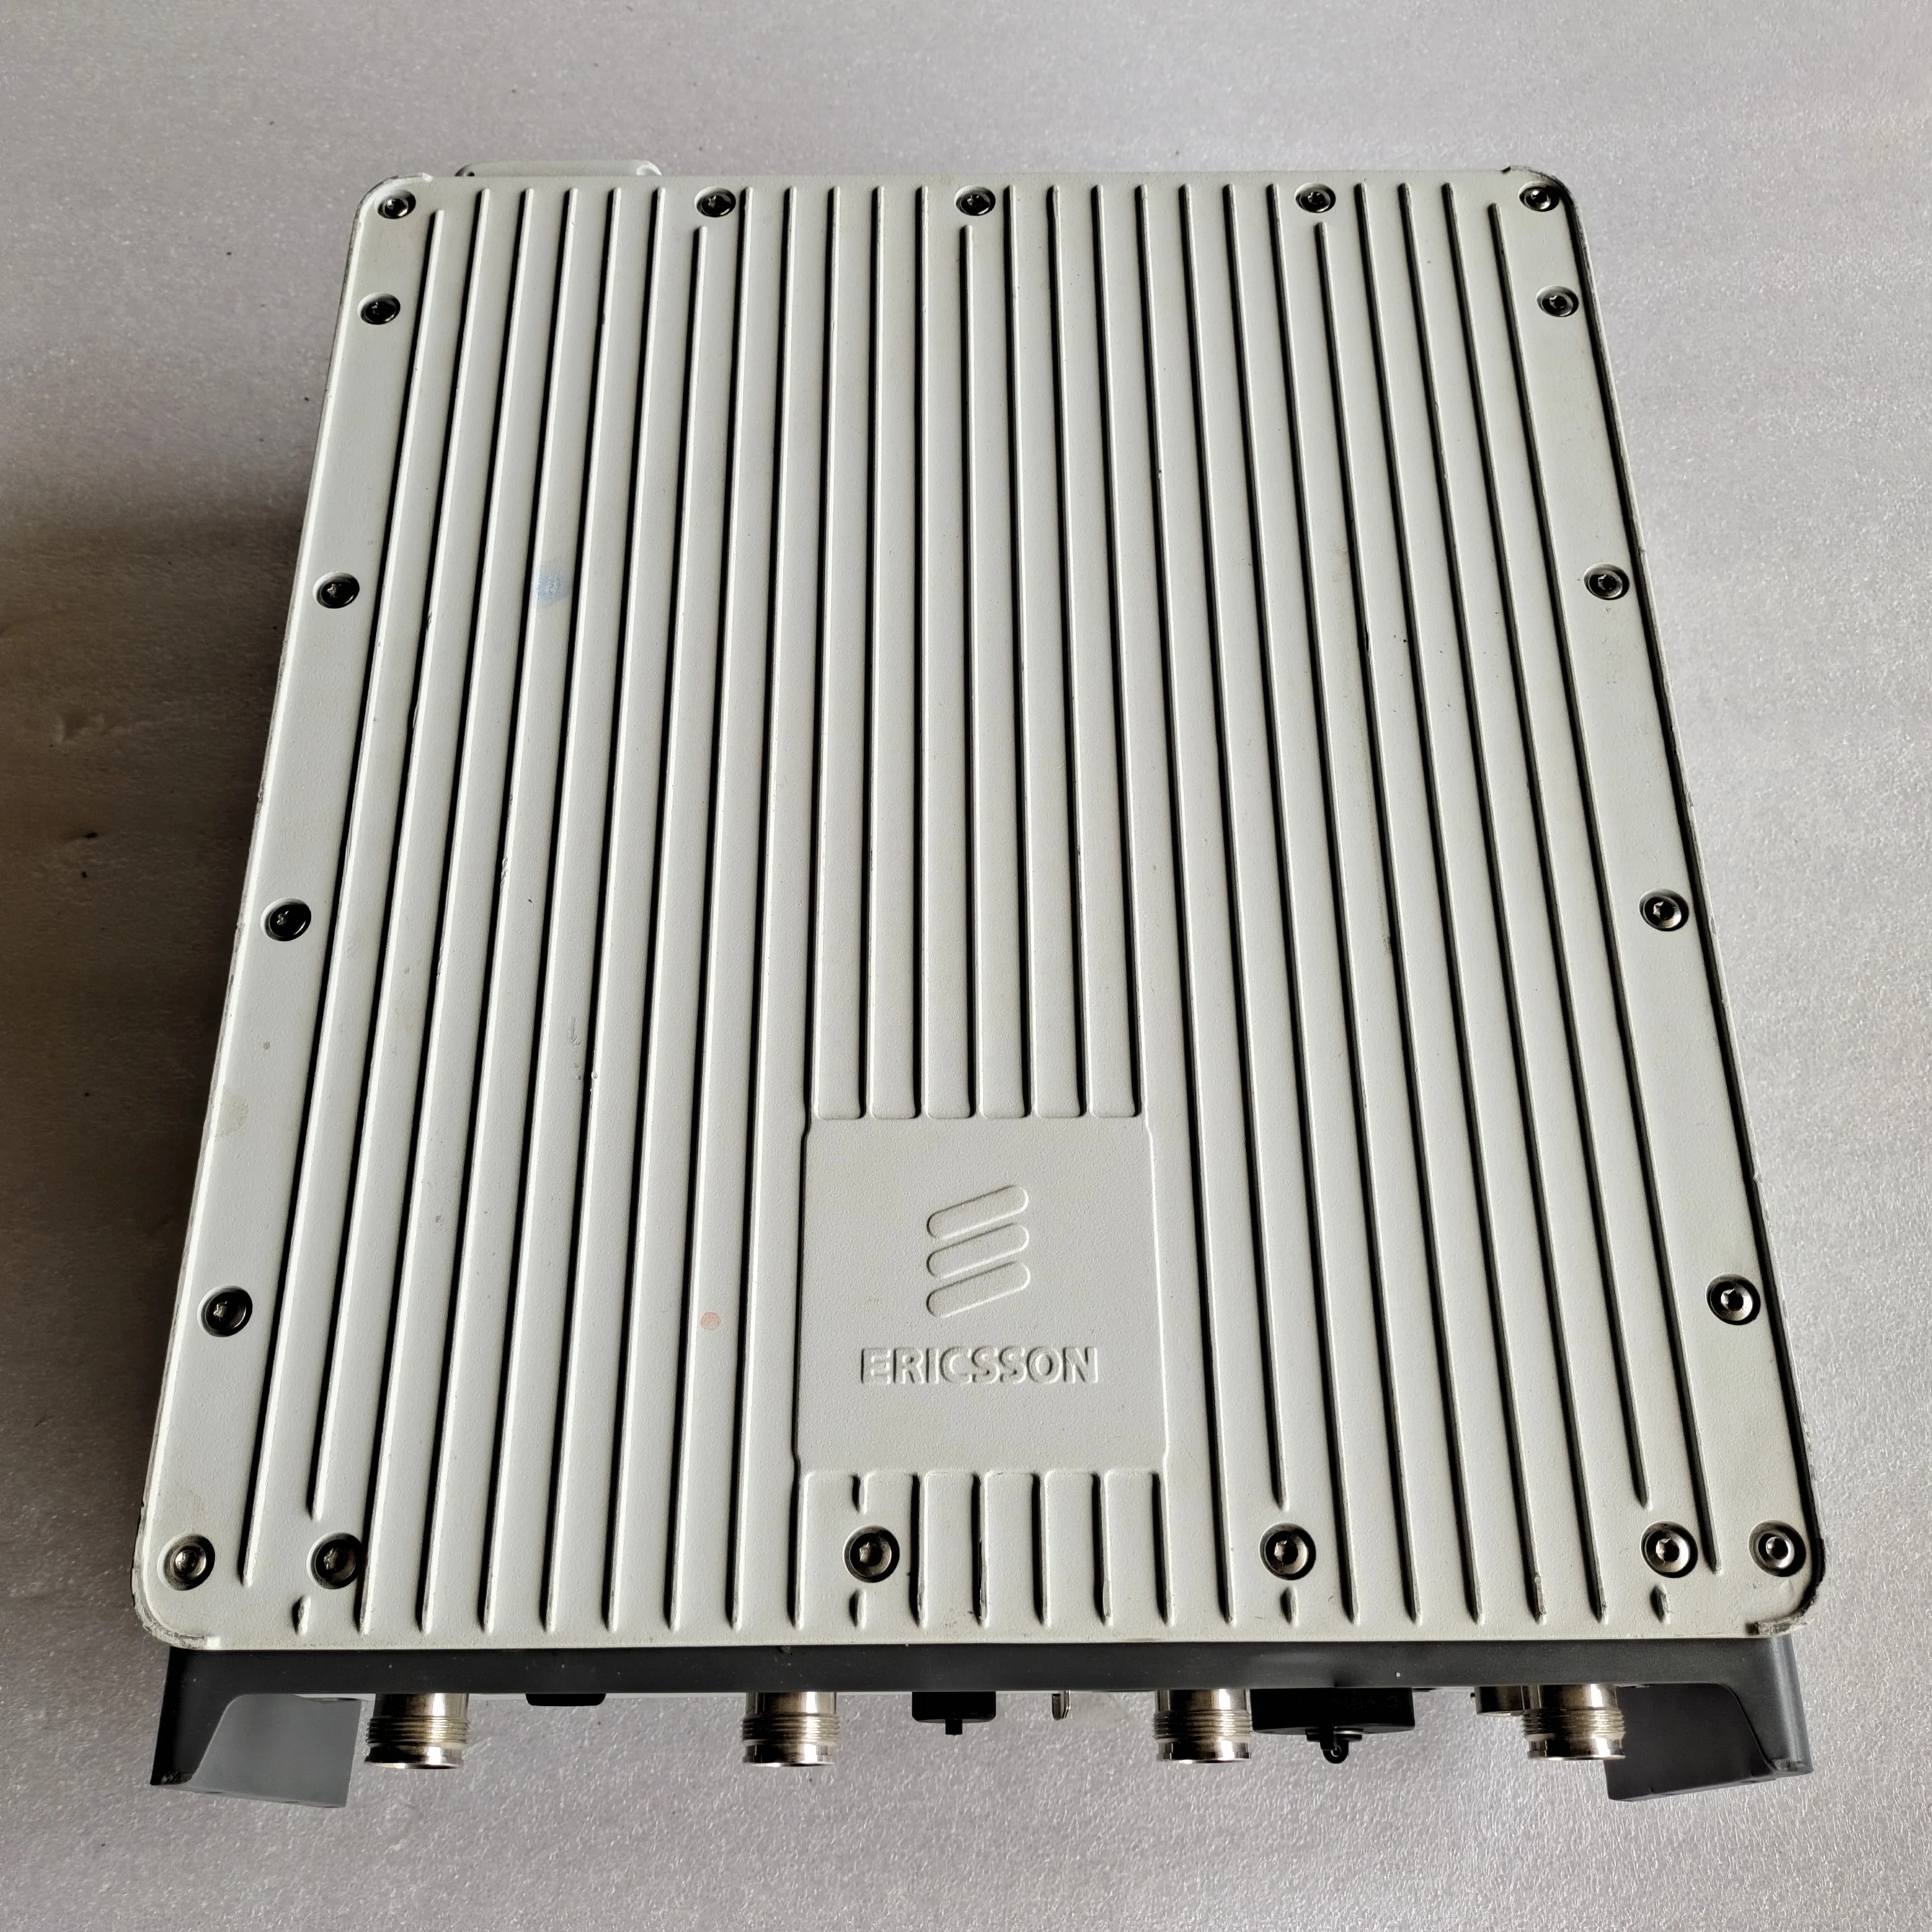 YUNPAN gsm bts base station factory for stairwells